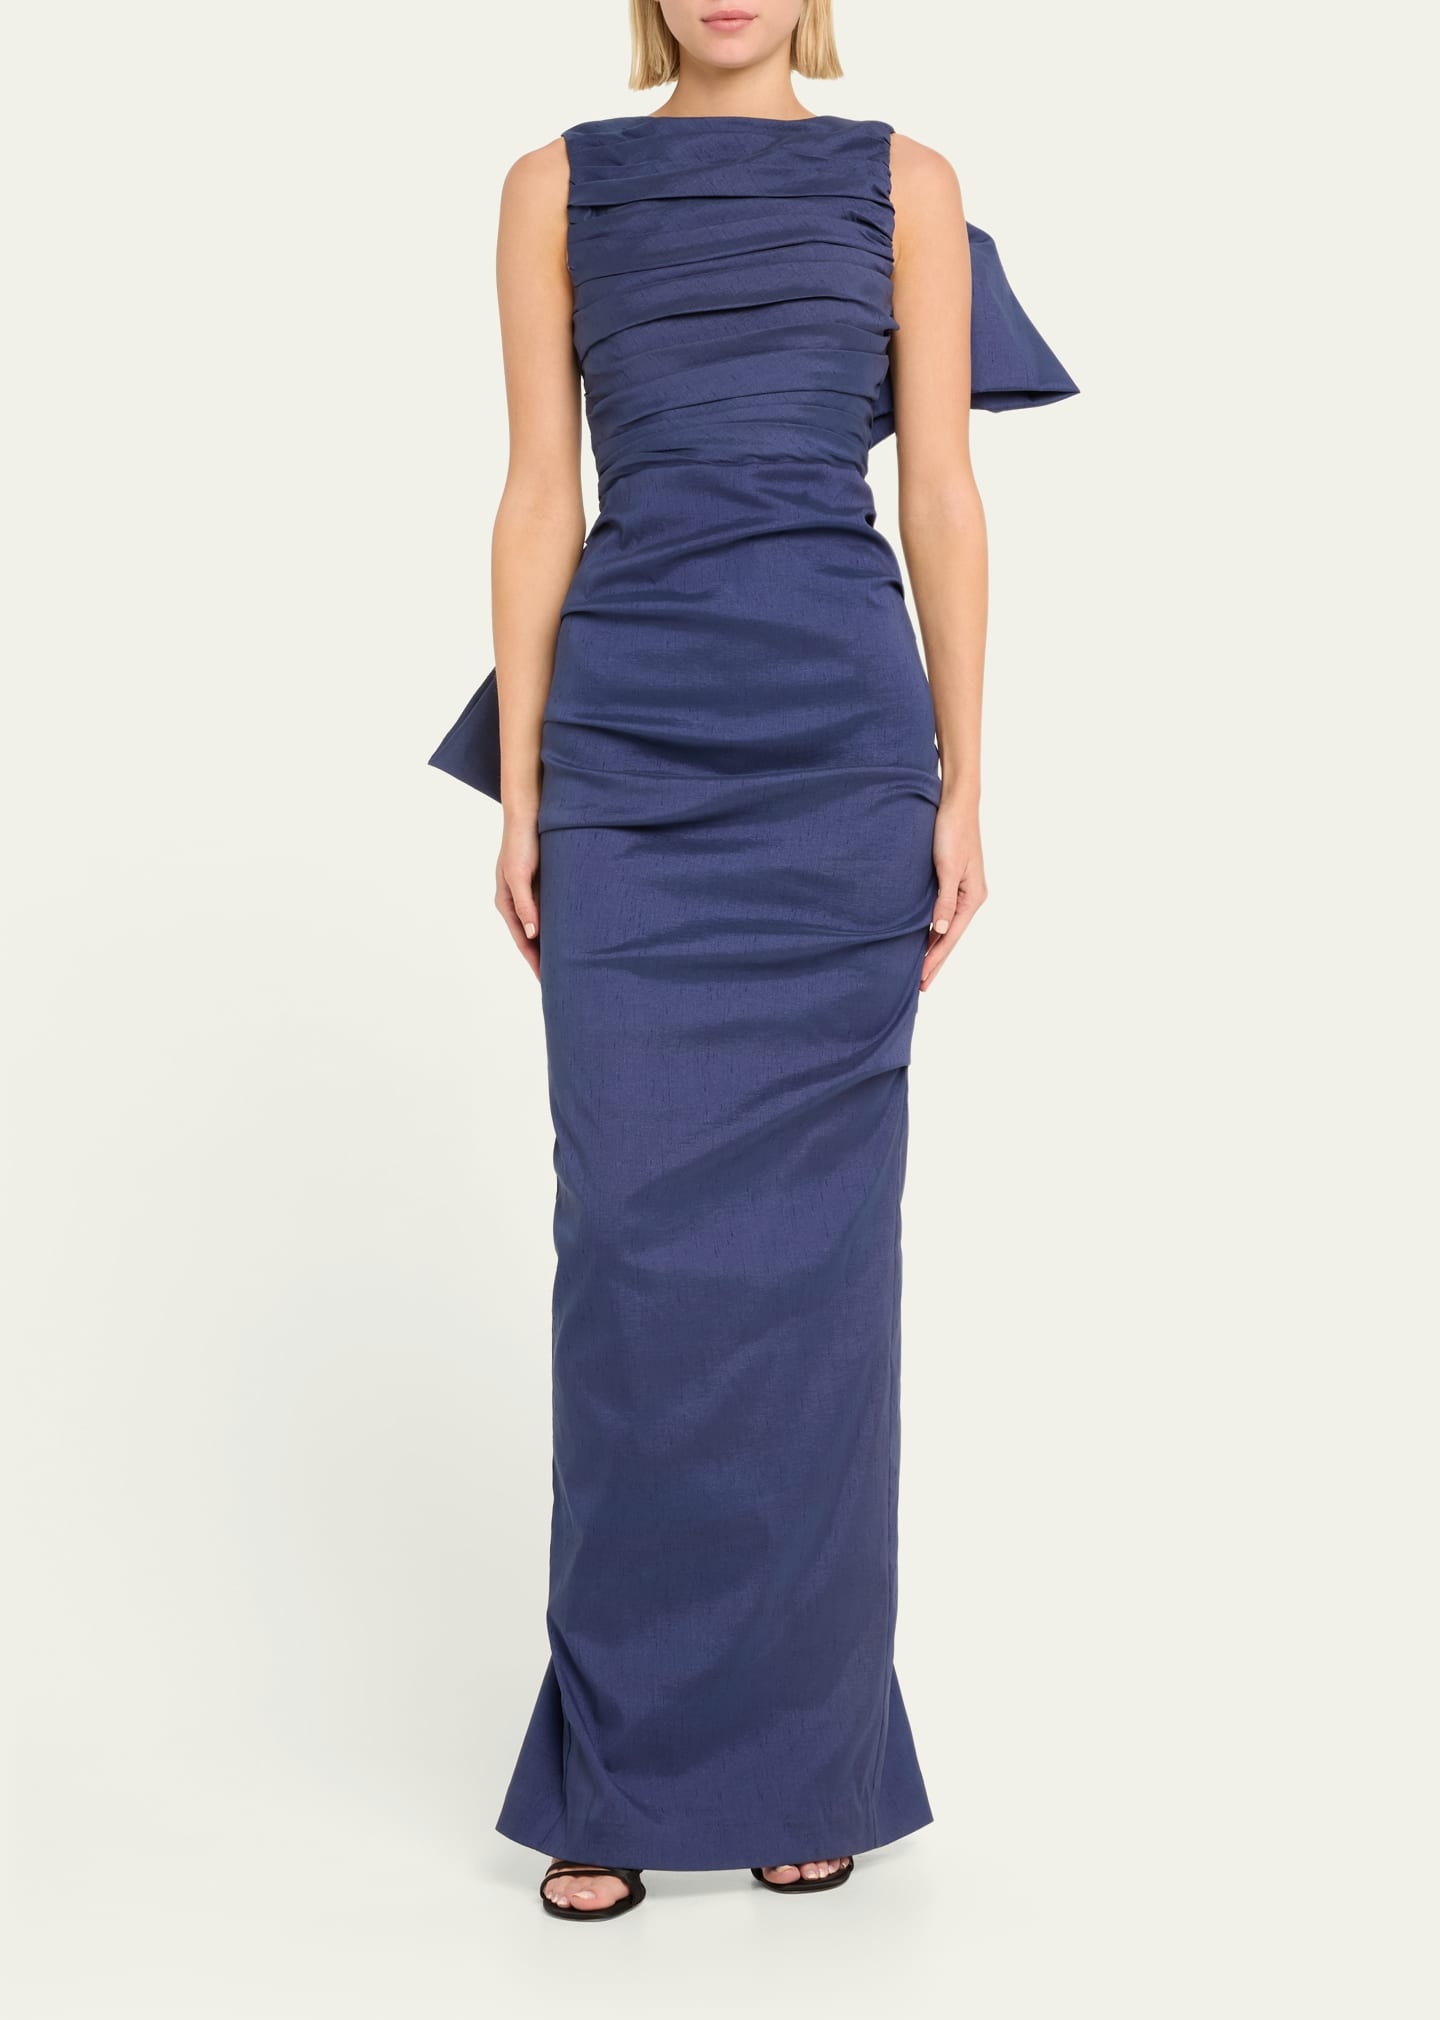 Zora Ruched Taffeta Gown with Back Bow - 2